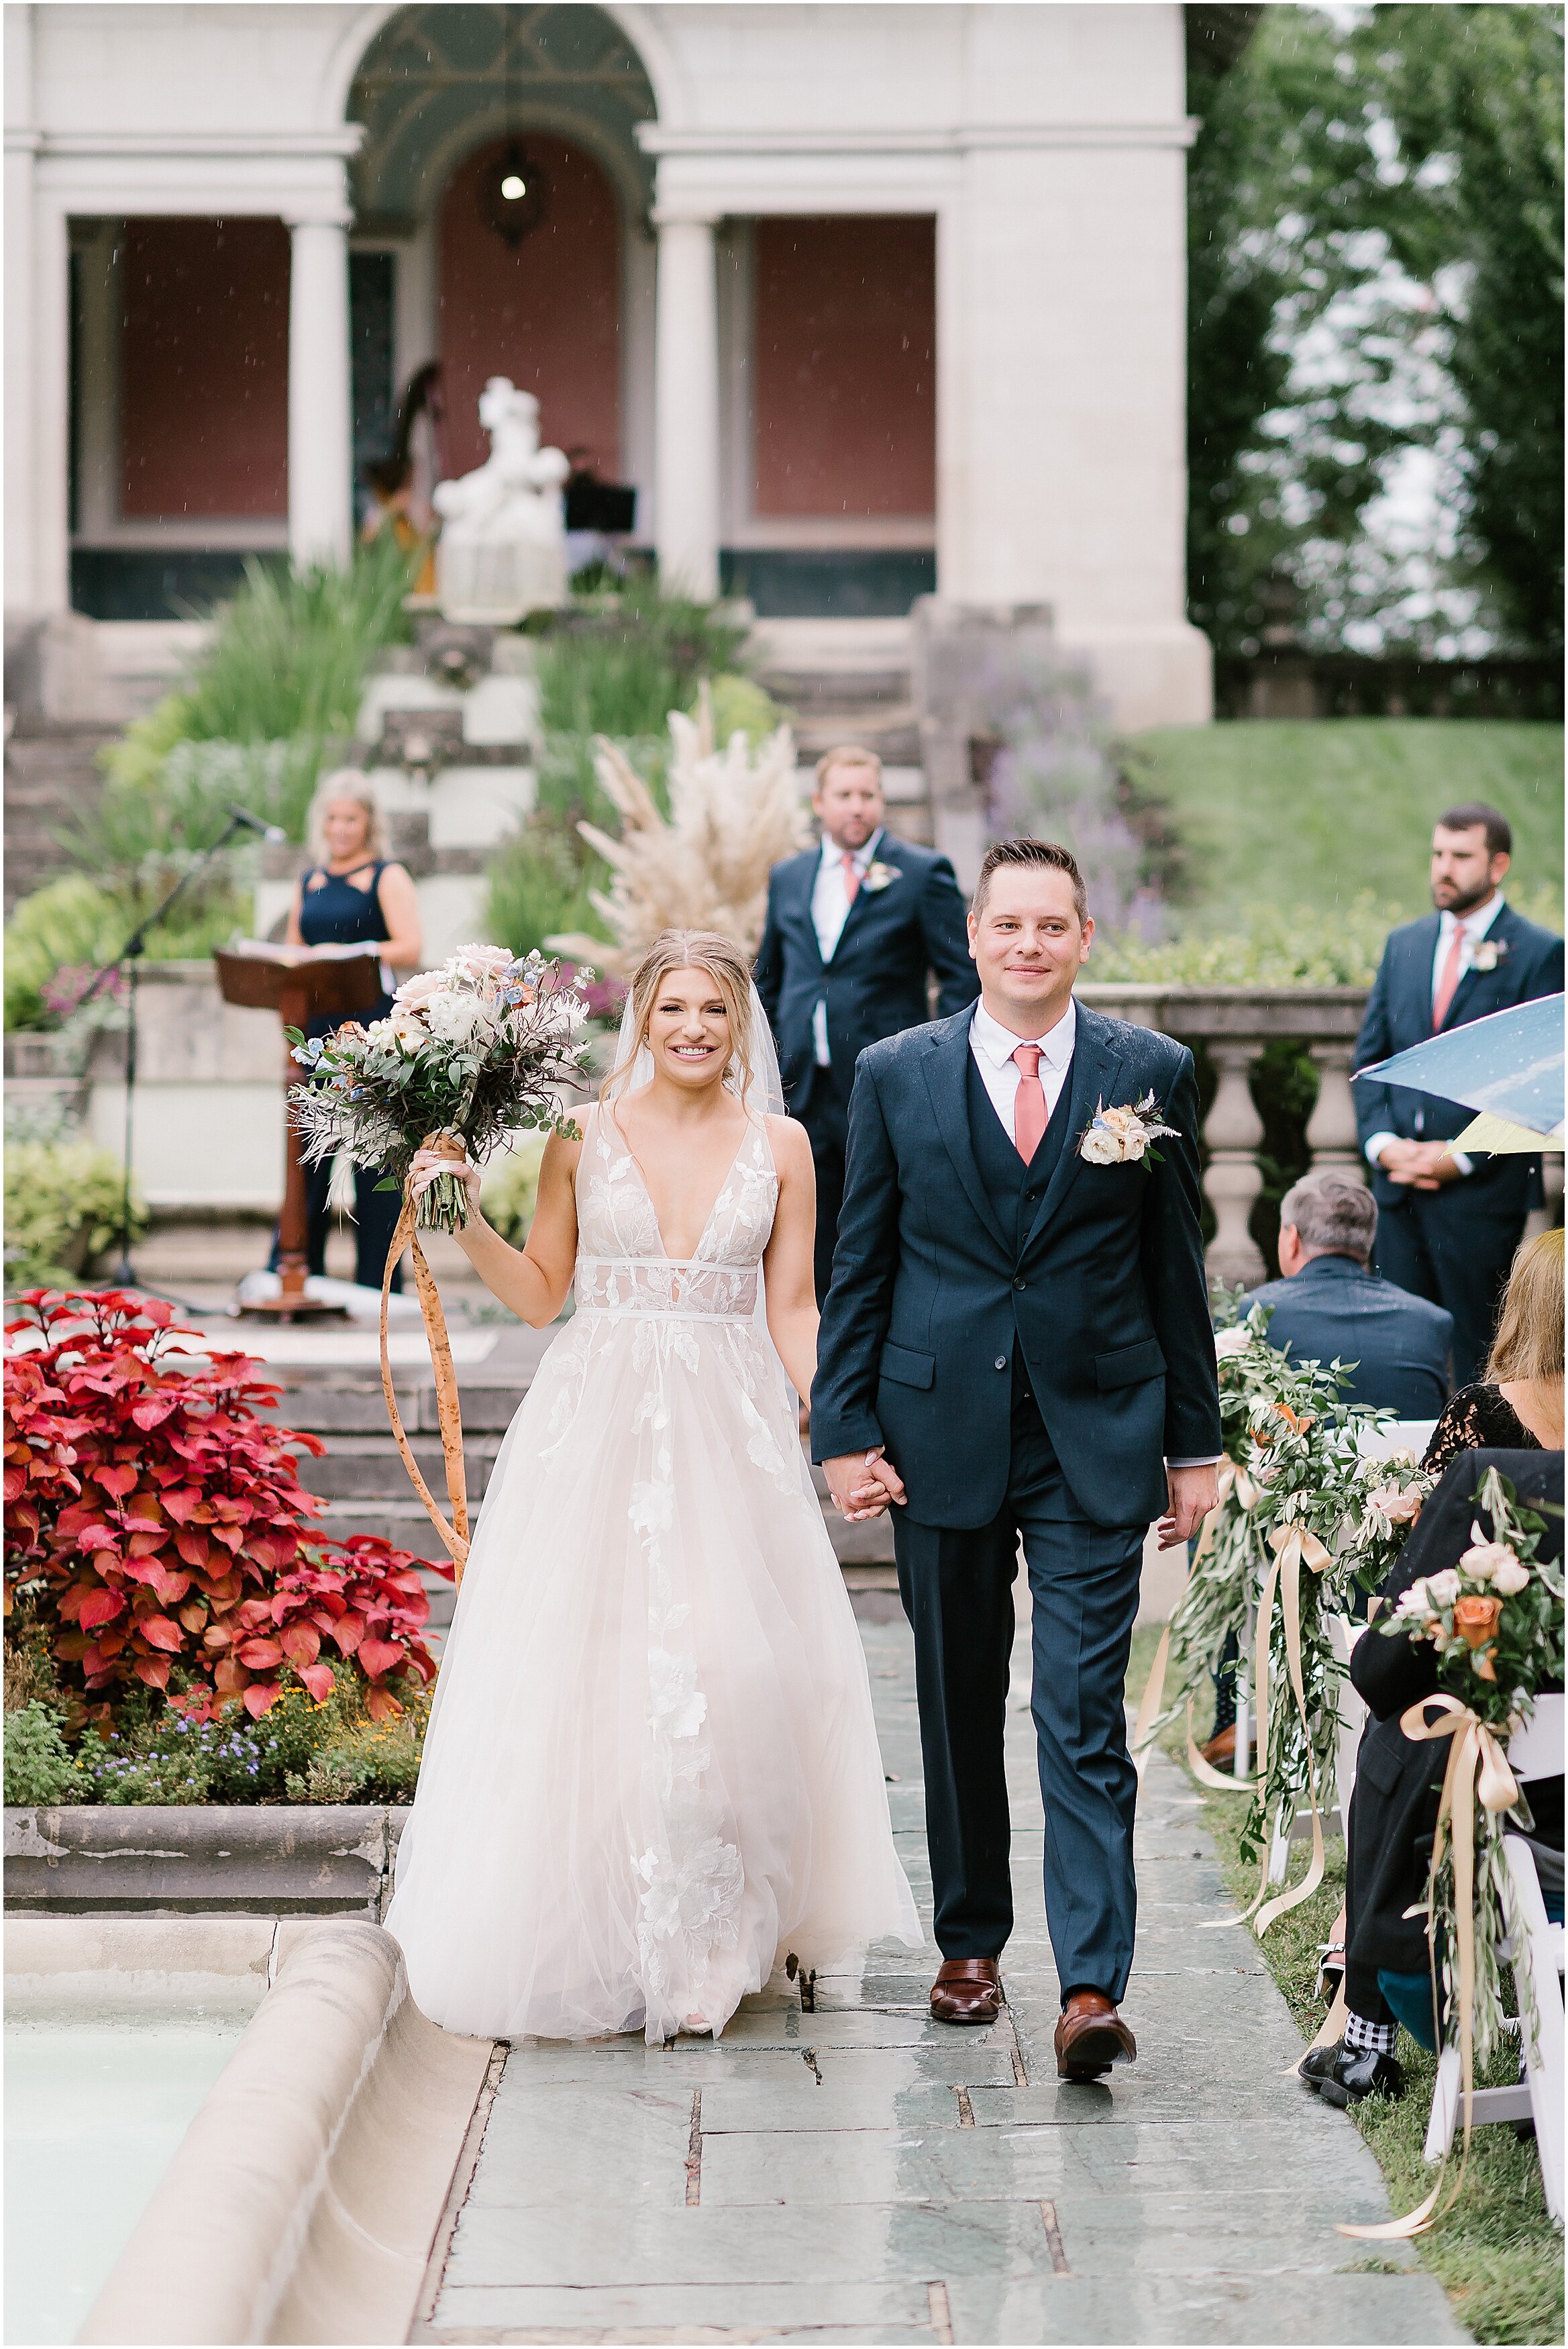 Rebecca Shehorn Photography Colleen and Kyle Inn at Irwin Gardens Wedding-572_The Commons Columbus Inn at Irwin Garden Indianapolis Wedding Photographer.jpg